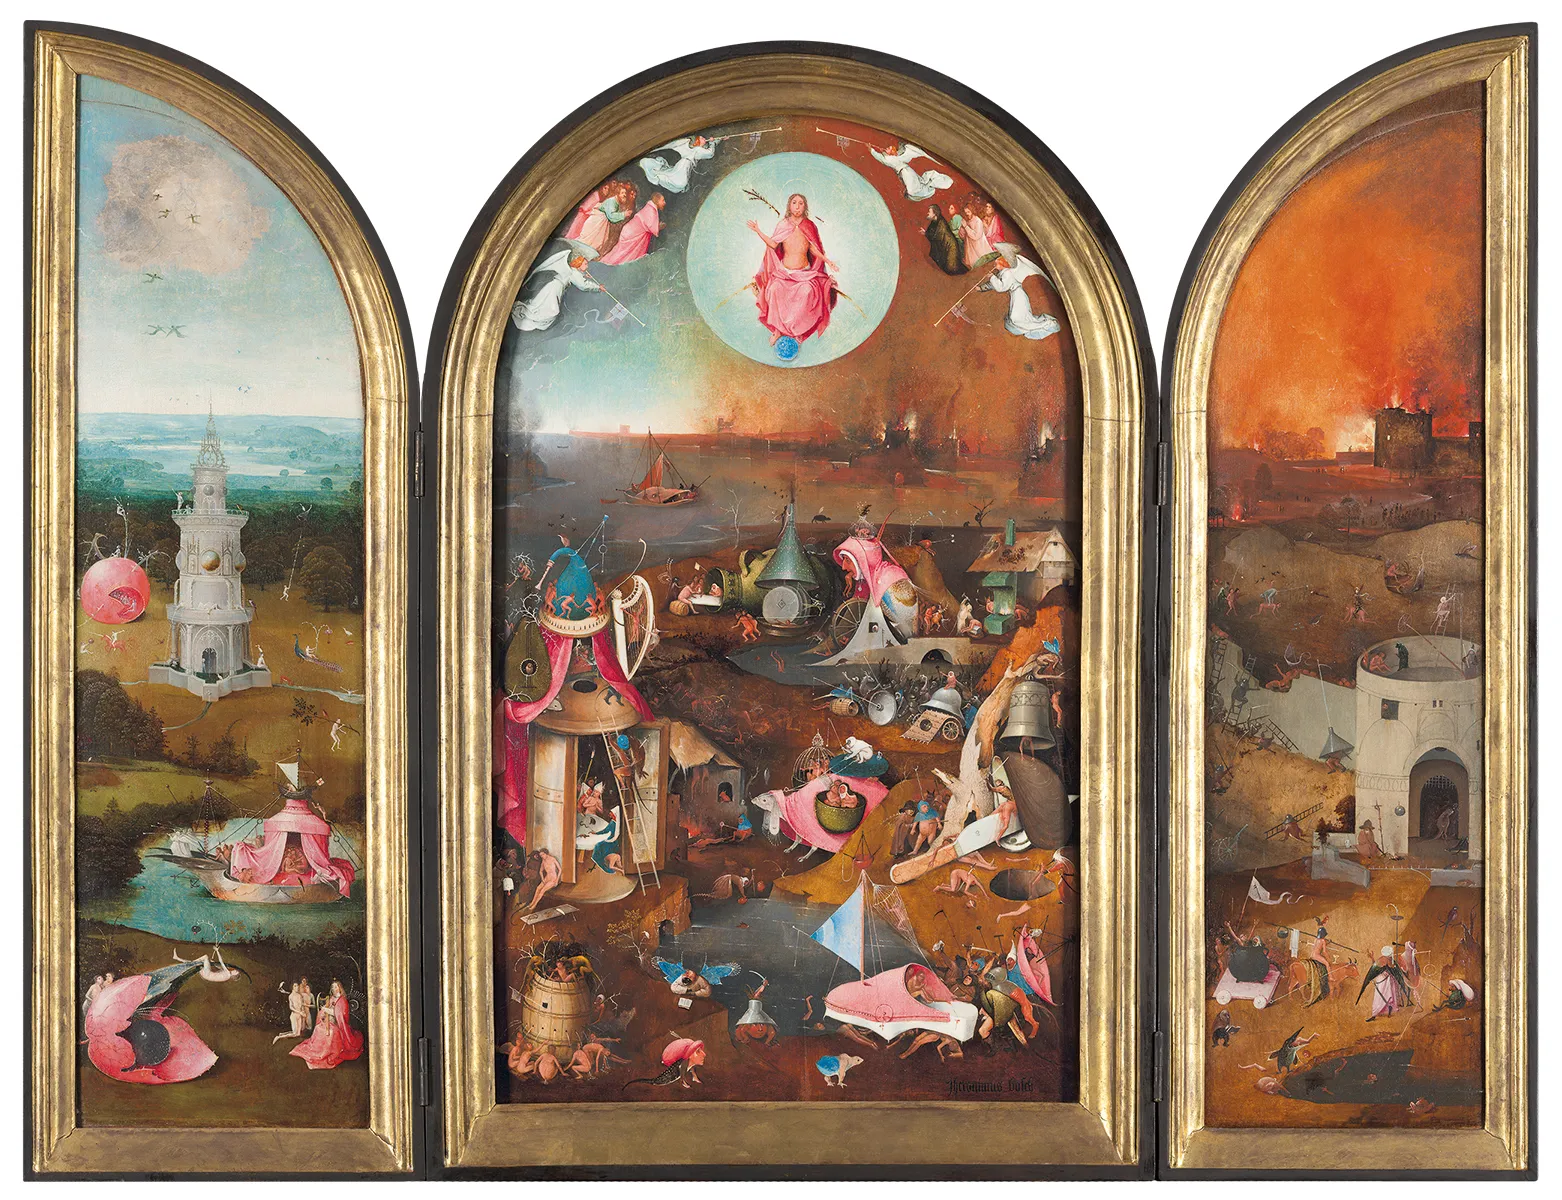 Inside Hieronymus Bosch’s Surreal Visions of Heaven and Hell | Smart News